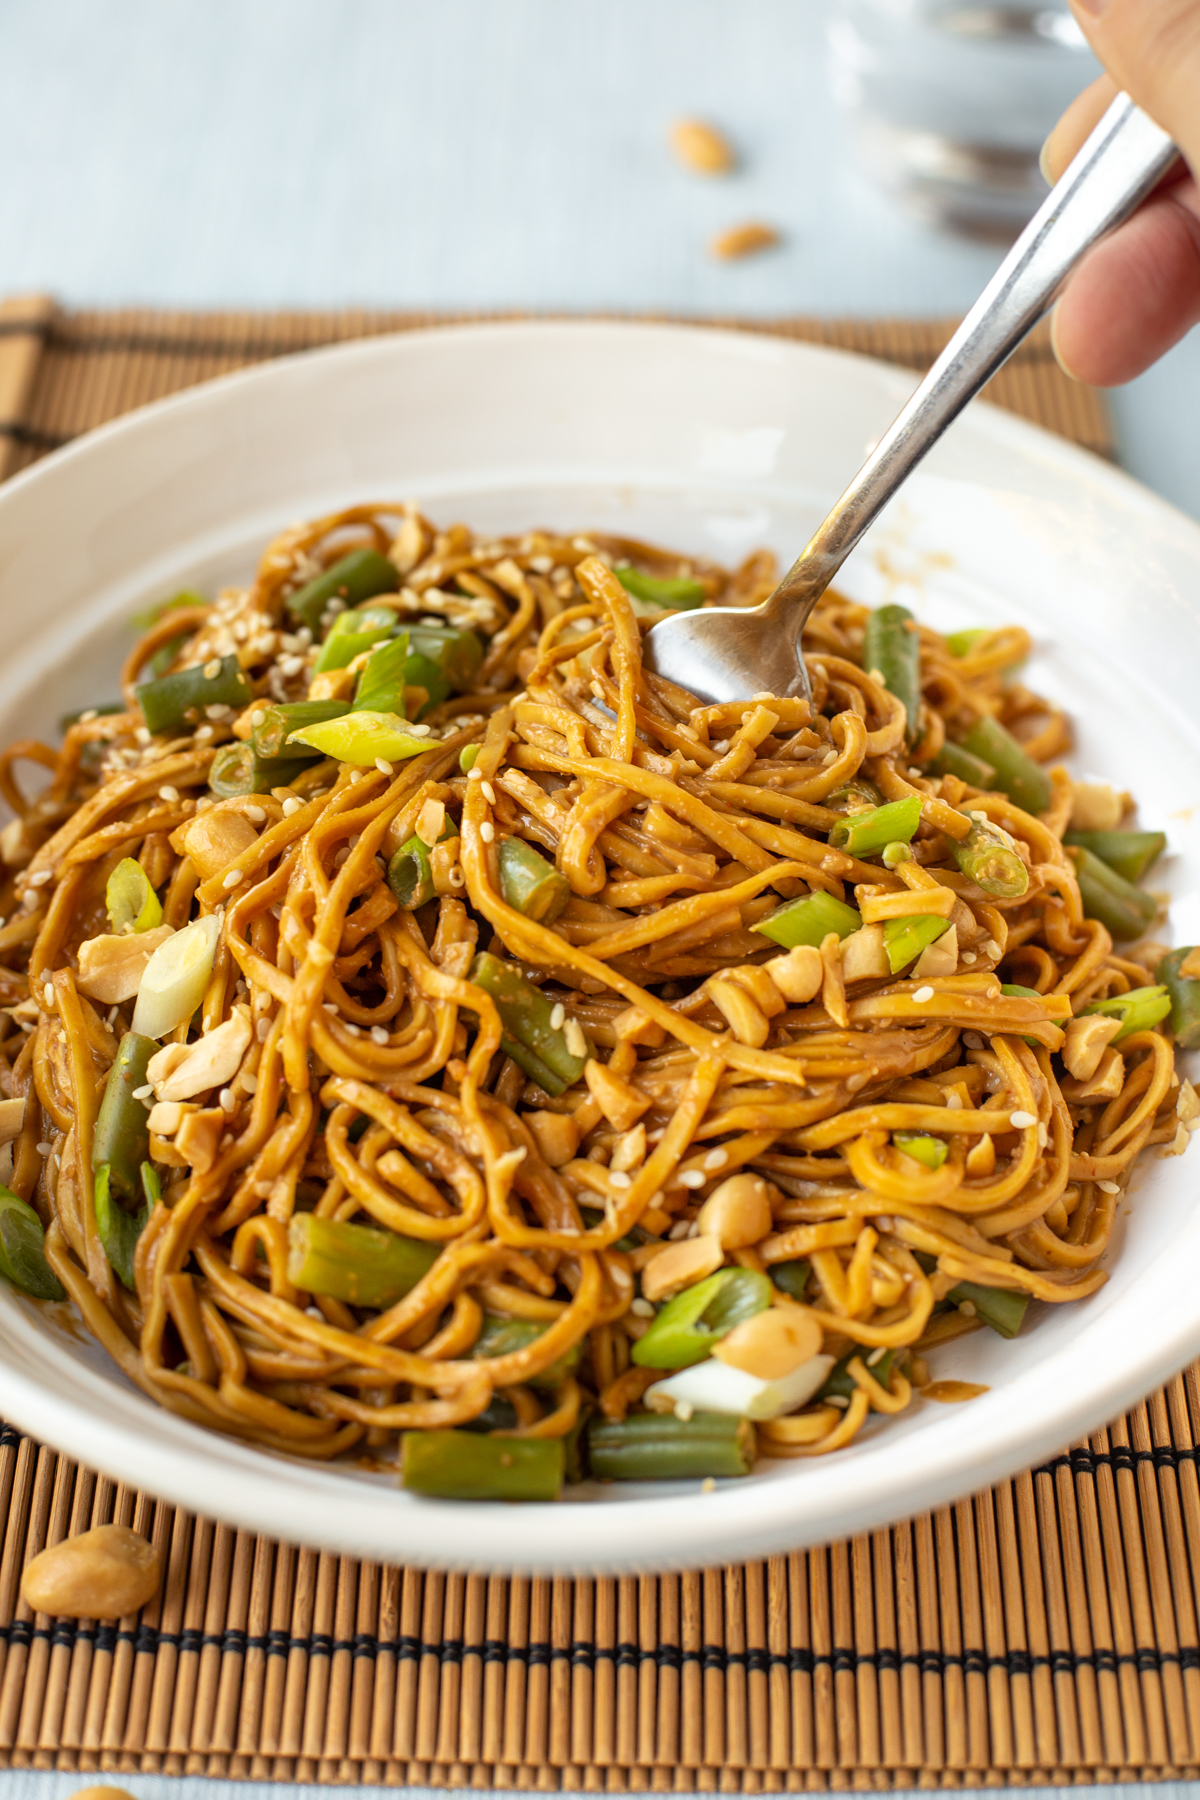 Peanut and Sesame Noodles (in 15 minutes!)